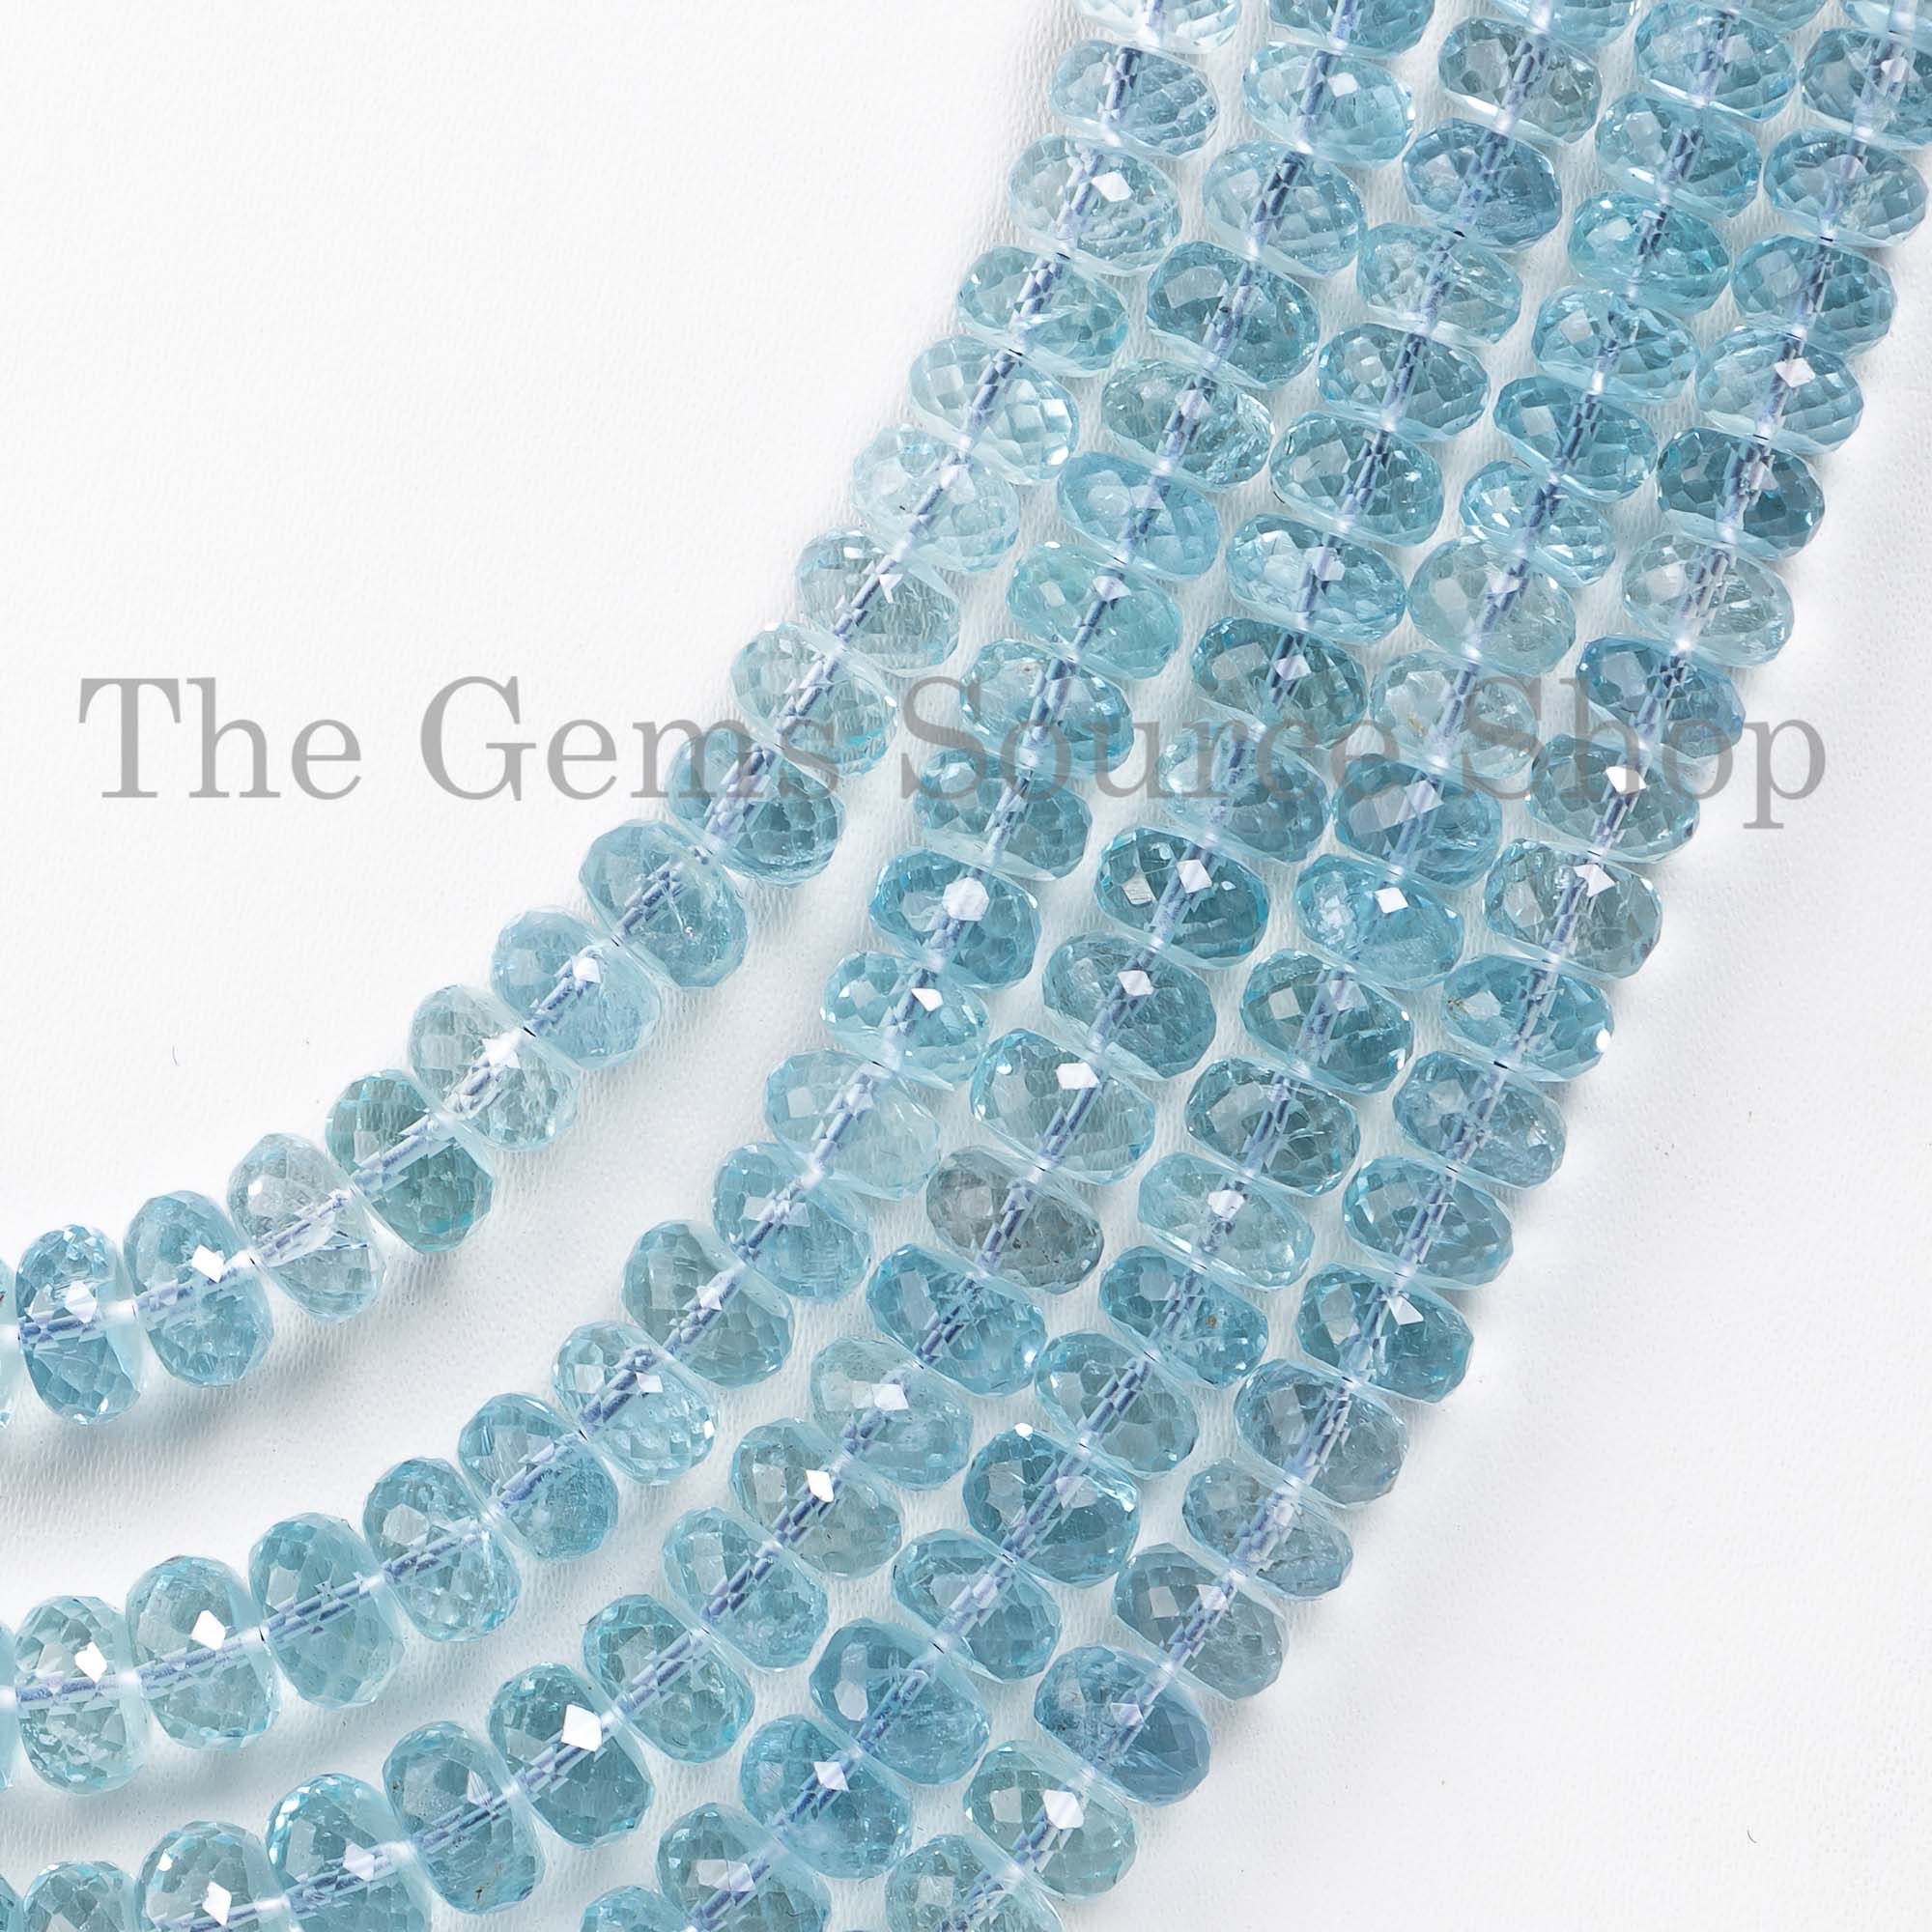 Natural Aquamarine Beads Necklace, Faceted Beads Necklace, Aquamarine Rondelle Beads Necklace